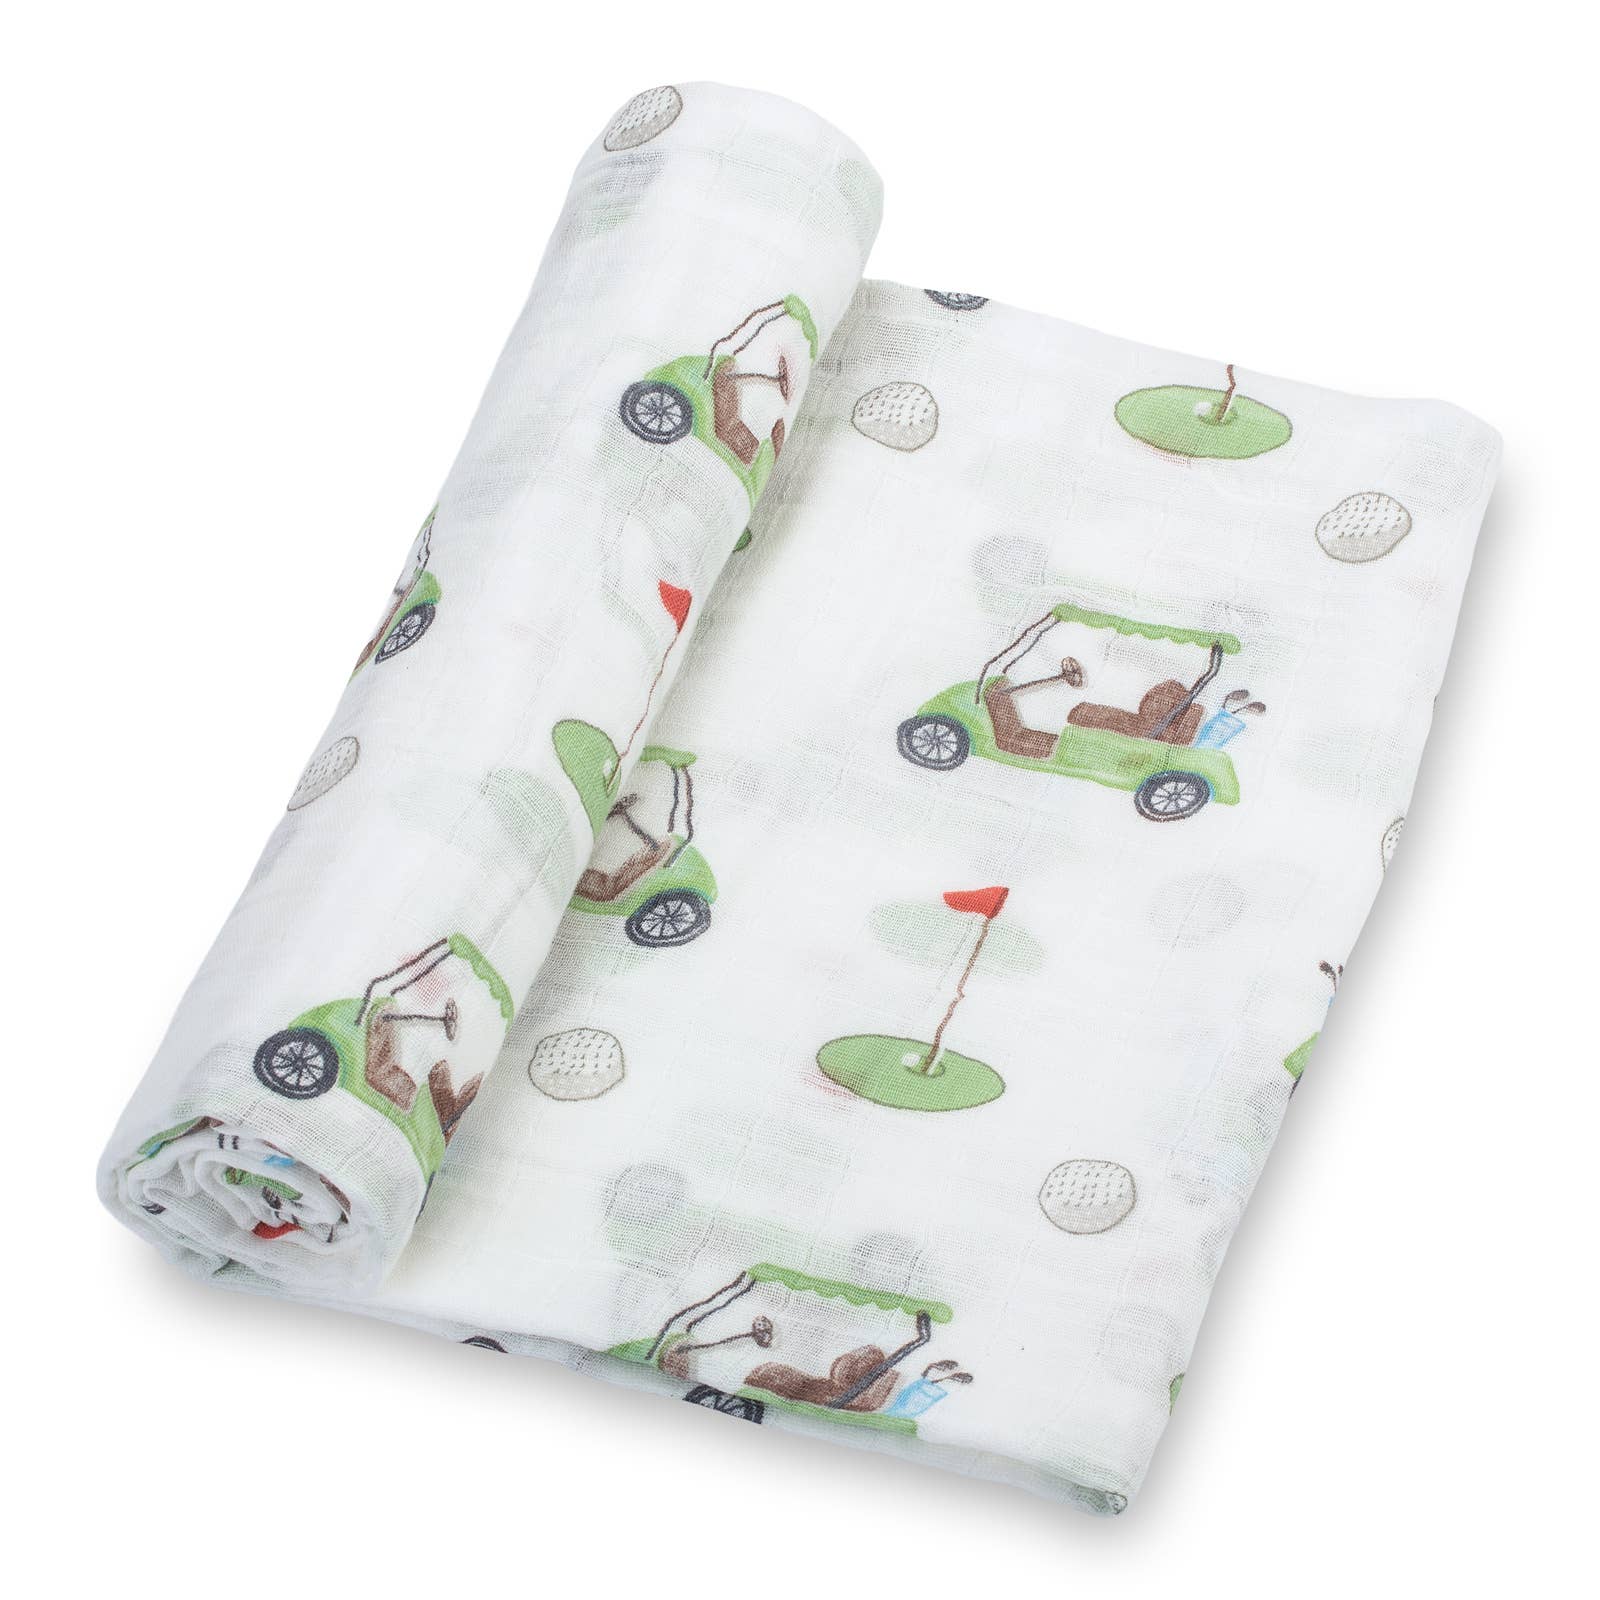 LollyBanks - Golf A Round Baby Swaddle Blanket